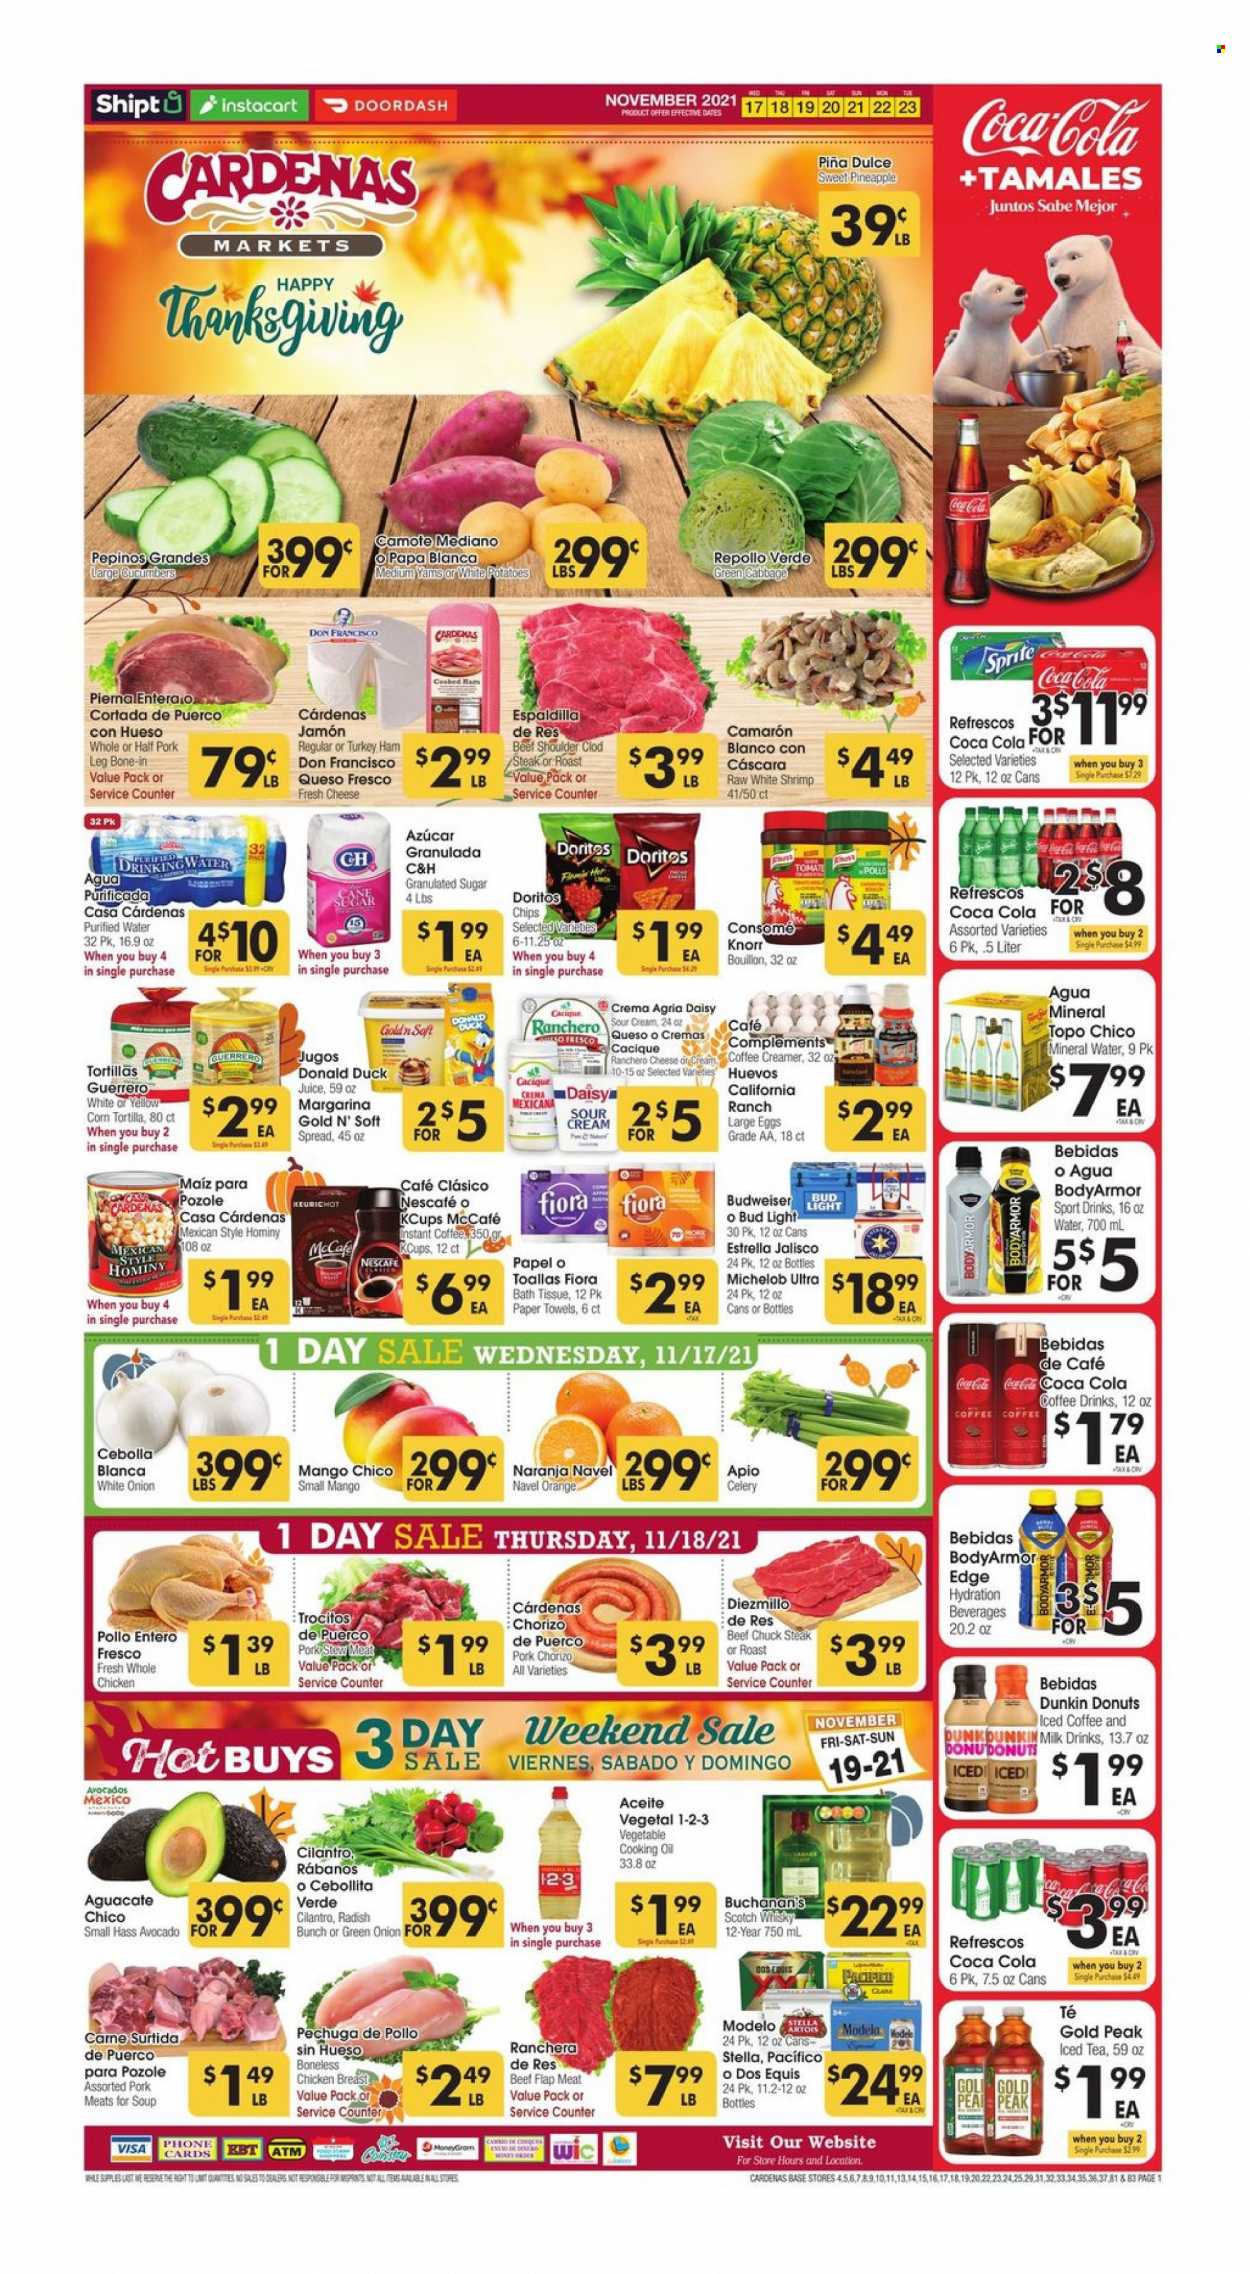 Cardenas Flyer - 11/17/2021 - 11/23/2021 - Sales products - stew meat, tortillas, donut, cabbage, celery, cucumbers, radishes, potatoes, green onion, sleeved celery, avocado, mango, pineapple, orange, shrimps, soup, Knorr, cooked ham, ham, chorizo, queso fresco, milk, large eggs, sour cream, creamer, Doritos, chips, bouillon, granulated sugar, sugar, cilantro, oil, Coca-Cola, juice, ice tea, mineral water, purified water, iced coffee, Nescafé, L'Or, McCafe, scotch whisky, whisky, beer, Bud Light, Modelo, whole chicken, chicken breasts, chicken meat, beef meat, steak, chuck steak, pork meat, pork leg, bath tissue, kitchen towels, paper towels, Budweiser, Stella Artois, Dos Equis, Michelob, navel oranges. Page 1.